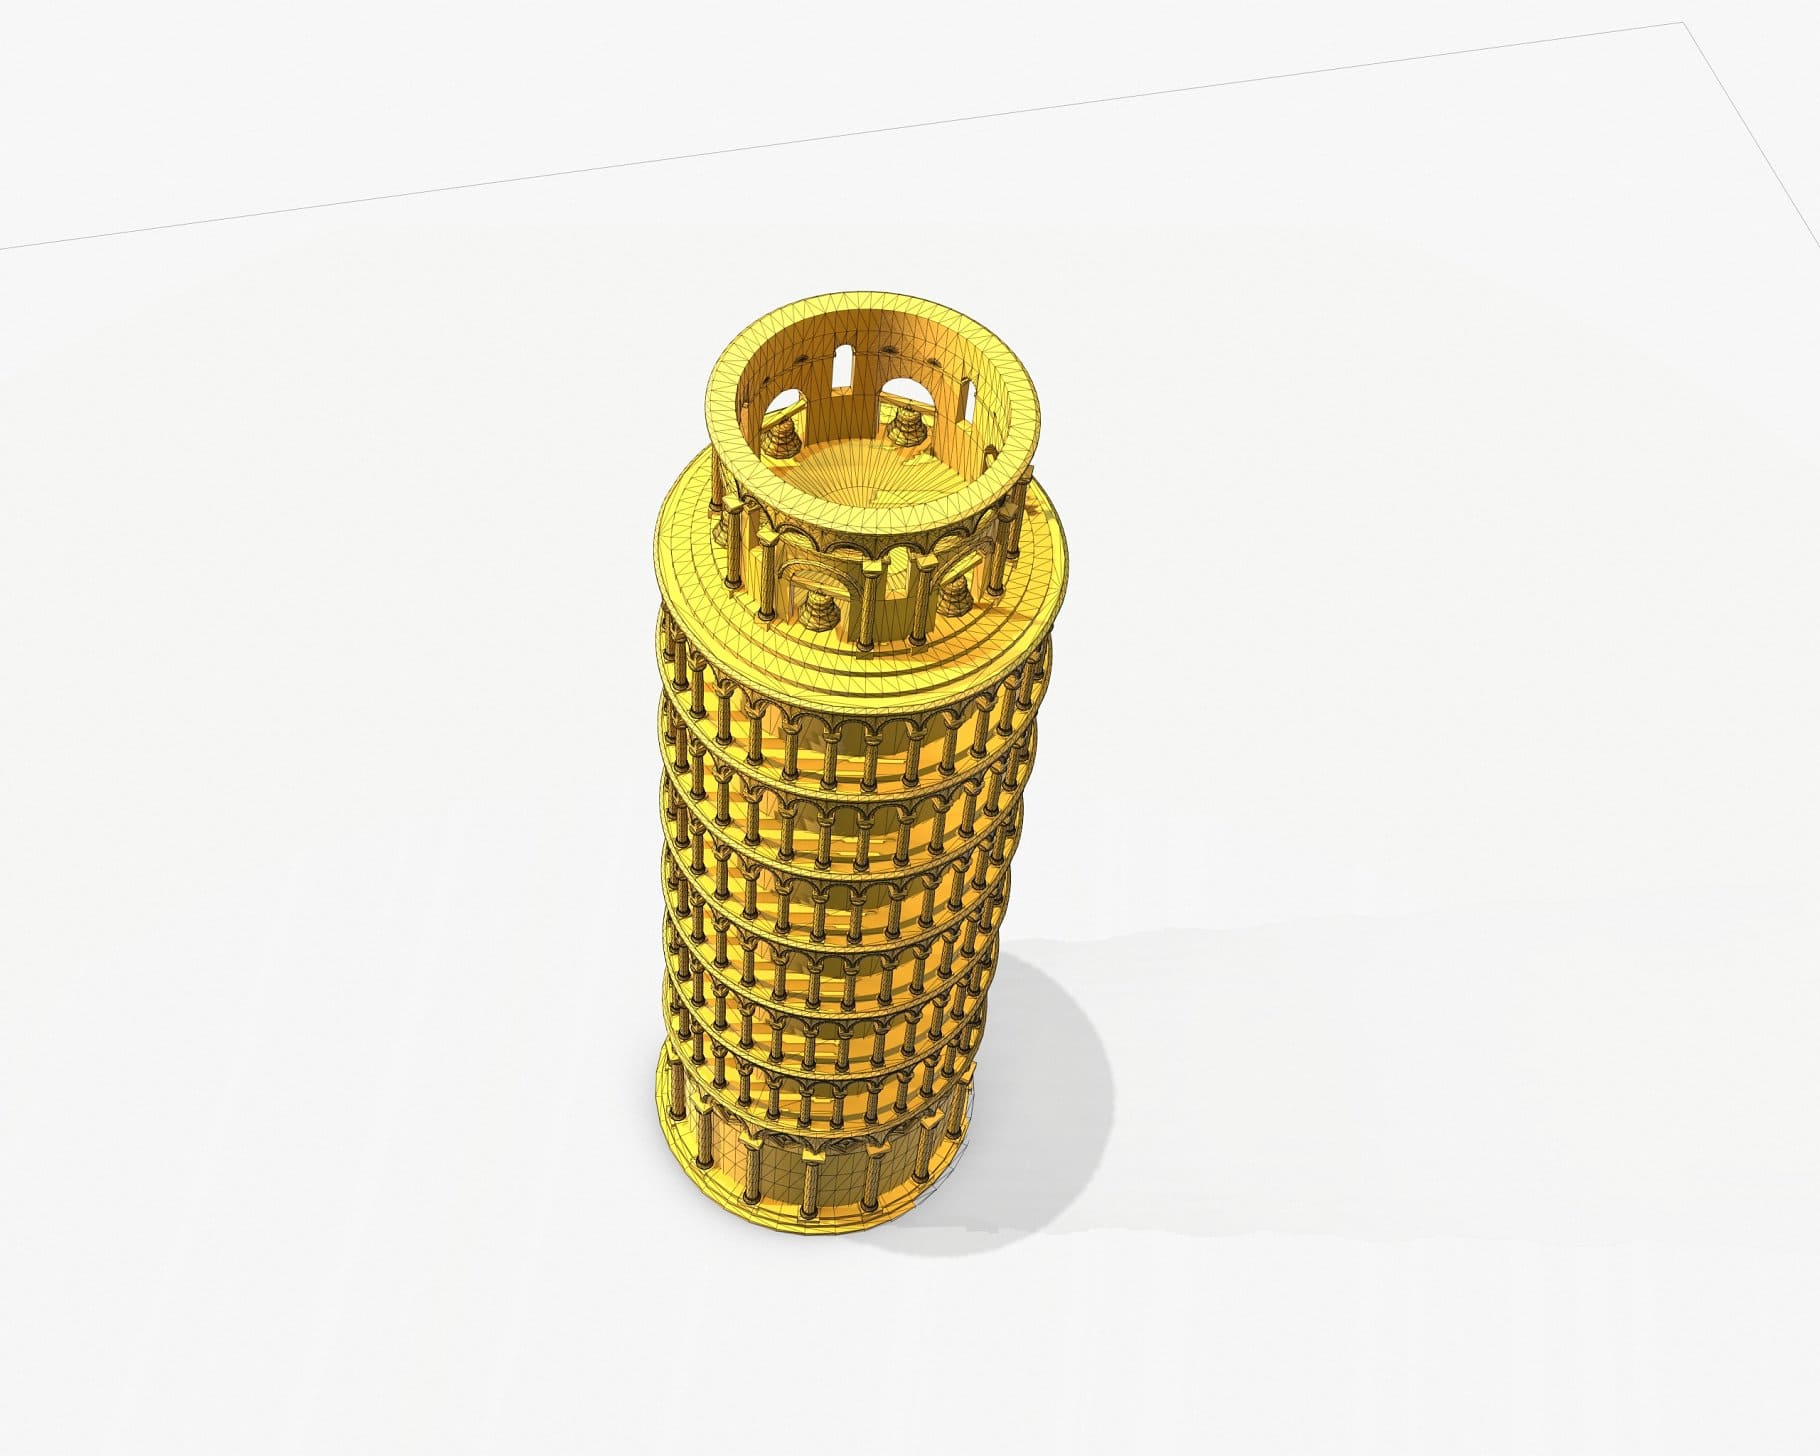 Top view of a yellow 3D model of the Leaning Tower of Pisa.